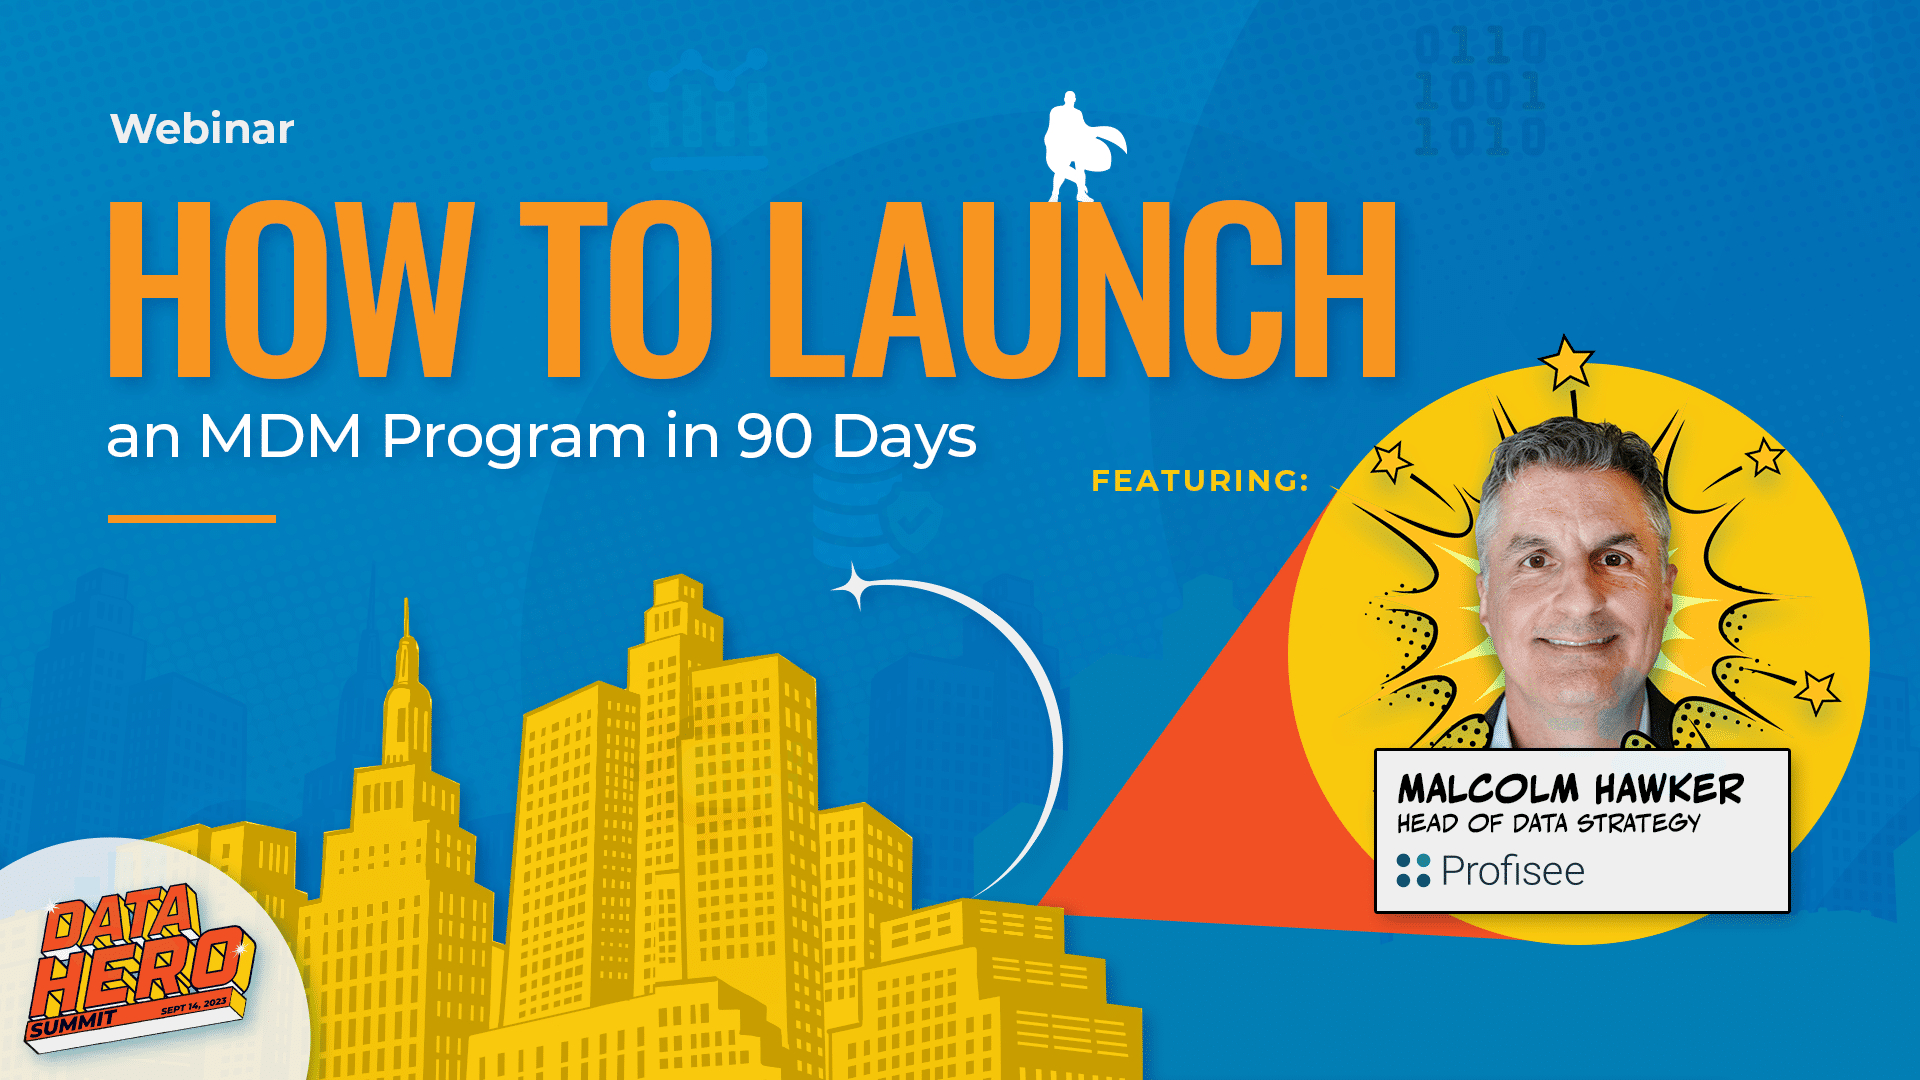 How to Launch an MDM Program in 90 Days